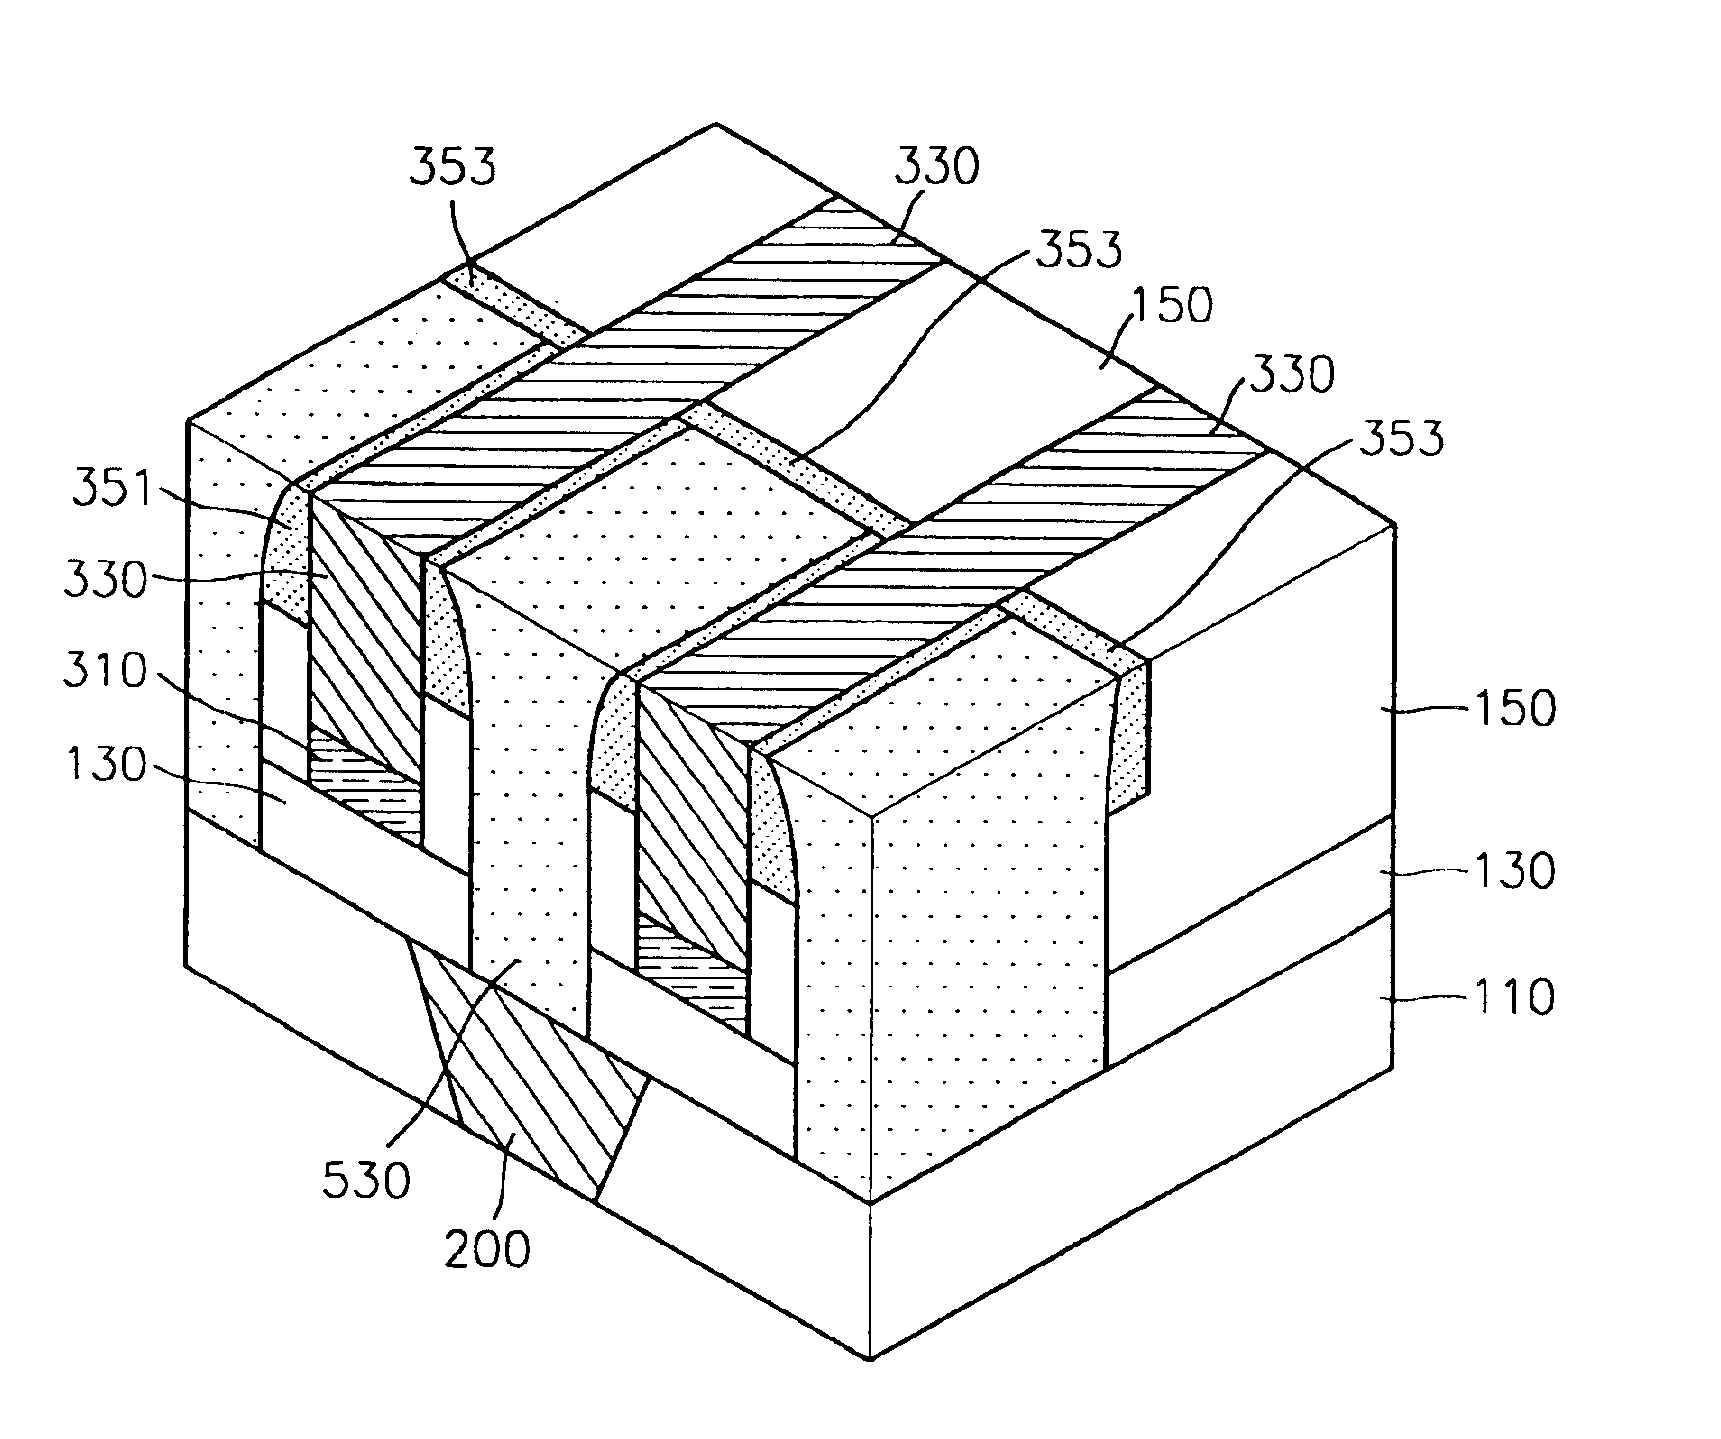 Method of manufacturing semiconductor device with interconnections and interconnection contacts and a device formed thereby